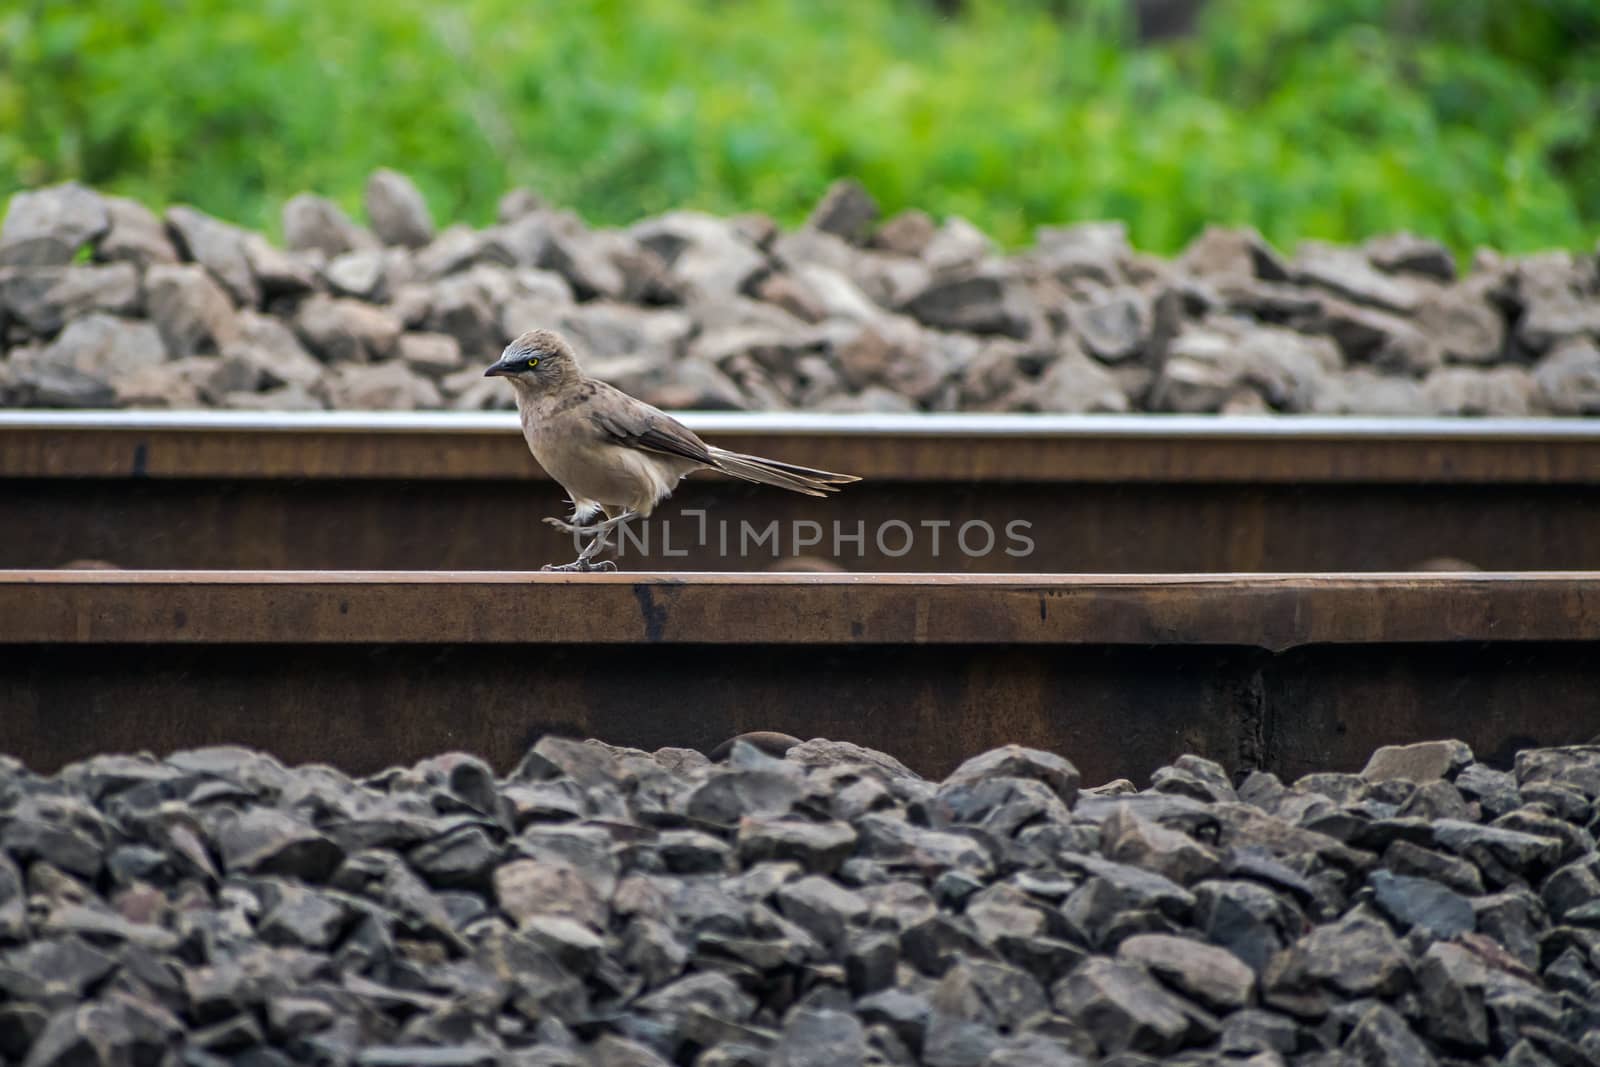 Isolated image of Common house sparrow Passeridae walking on the railway line.